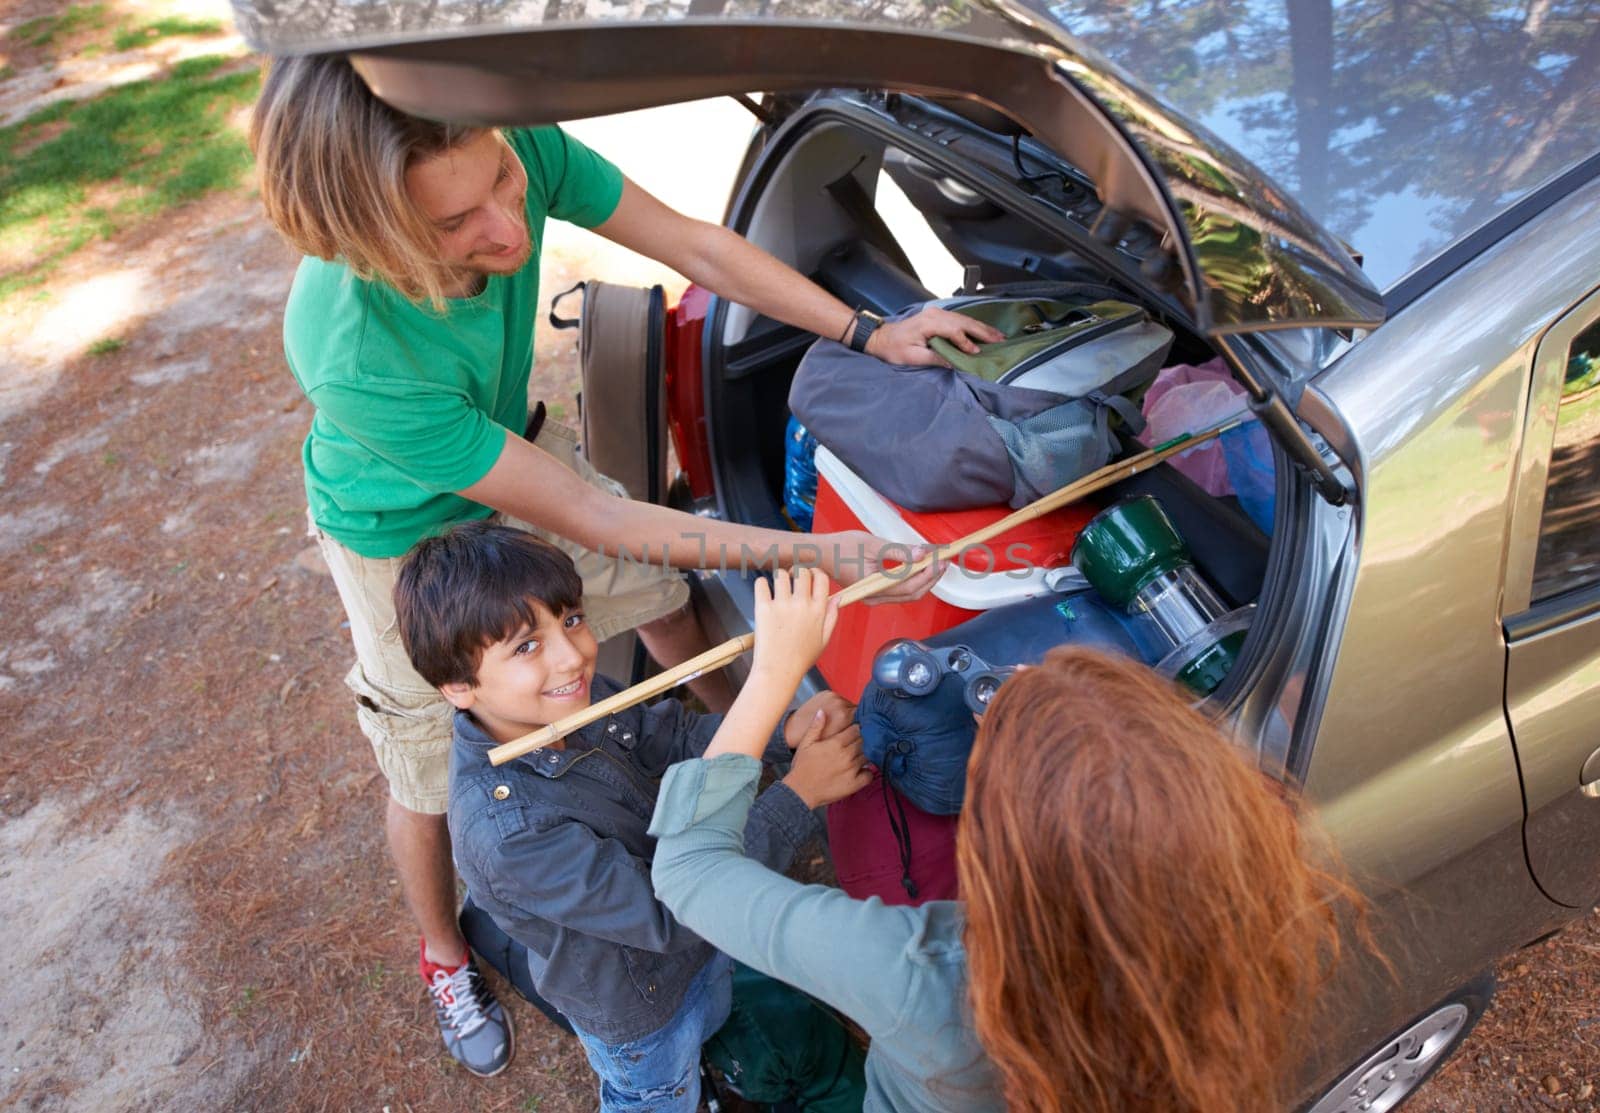 Happy family, car and packing for camping road trip, holiday or vacation above in nature outdoors. Top view of dad and kids getting ready for travel, camp adventure or getaway together in the forest.